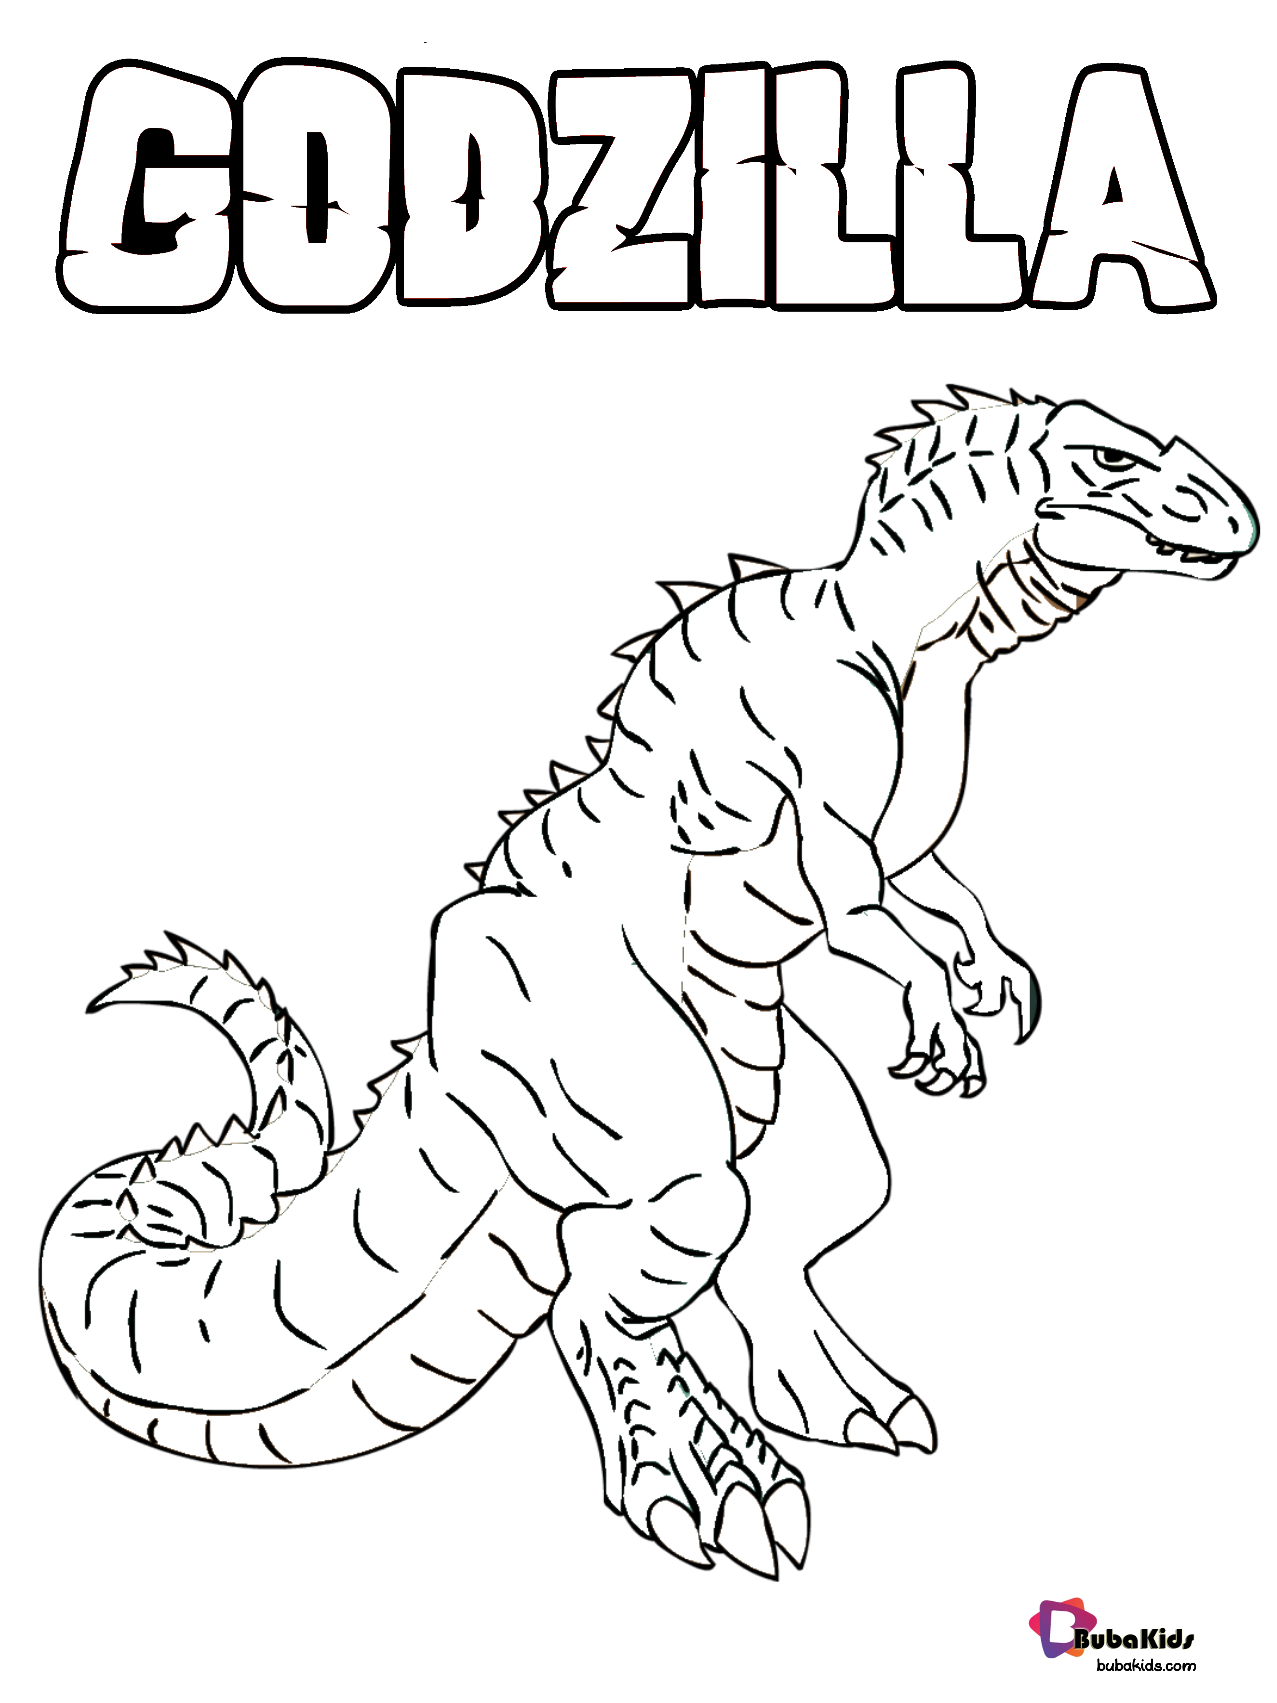 Godzilla King of the Monsters coloring page. Wallpaper